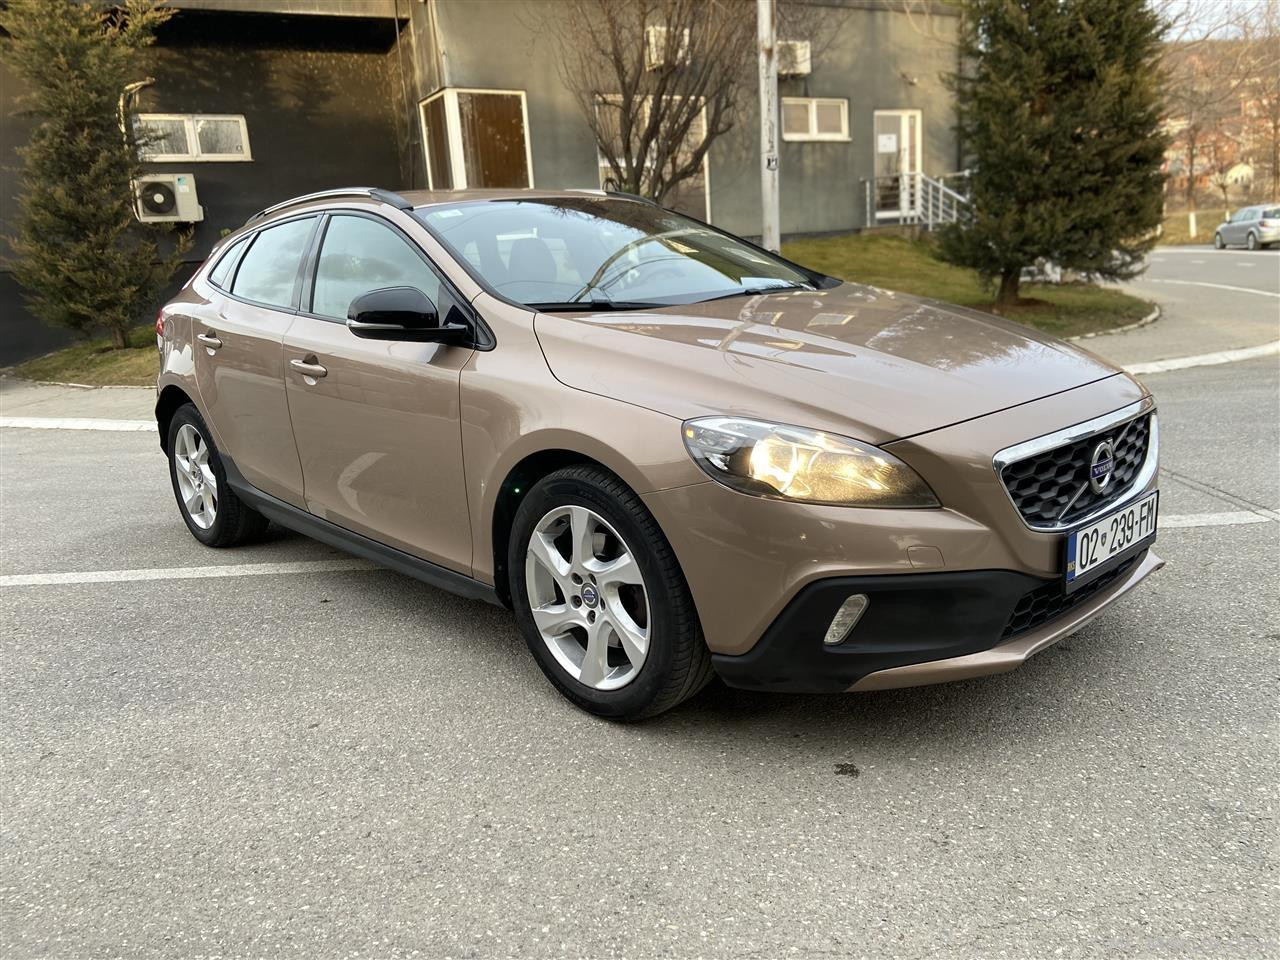 Volvo v40 Cross Country 1.6 disel 84 KW-114 PS 